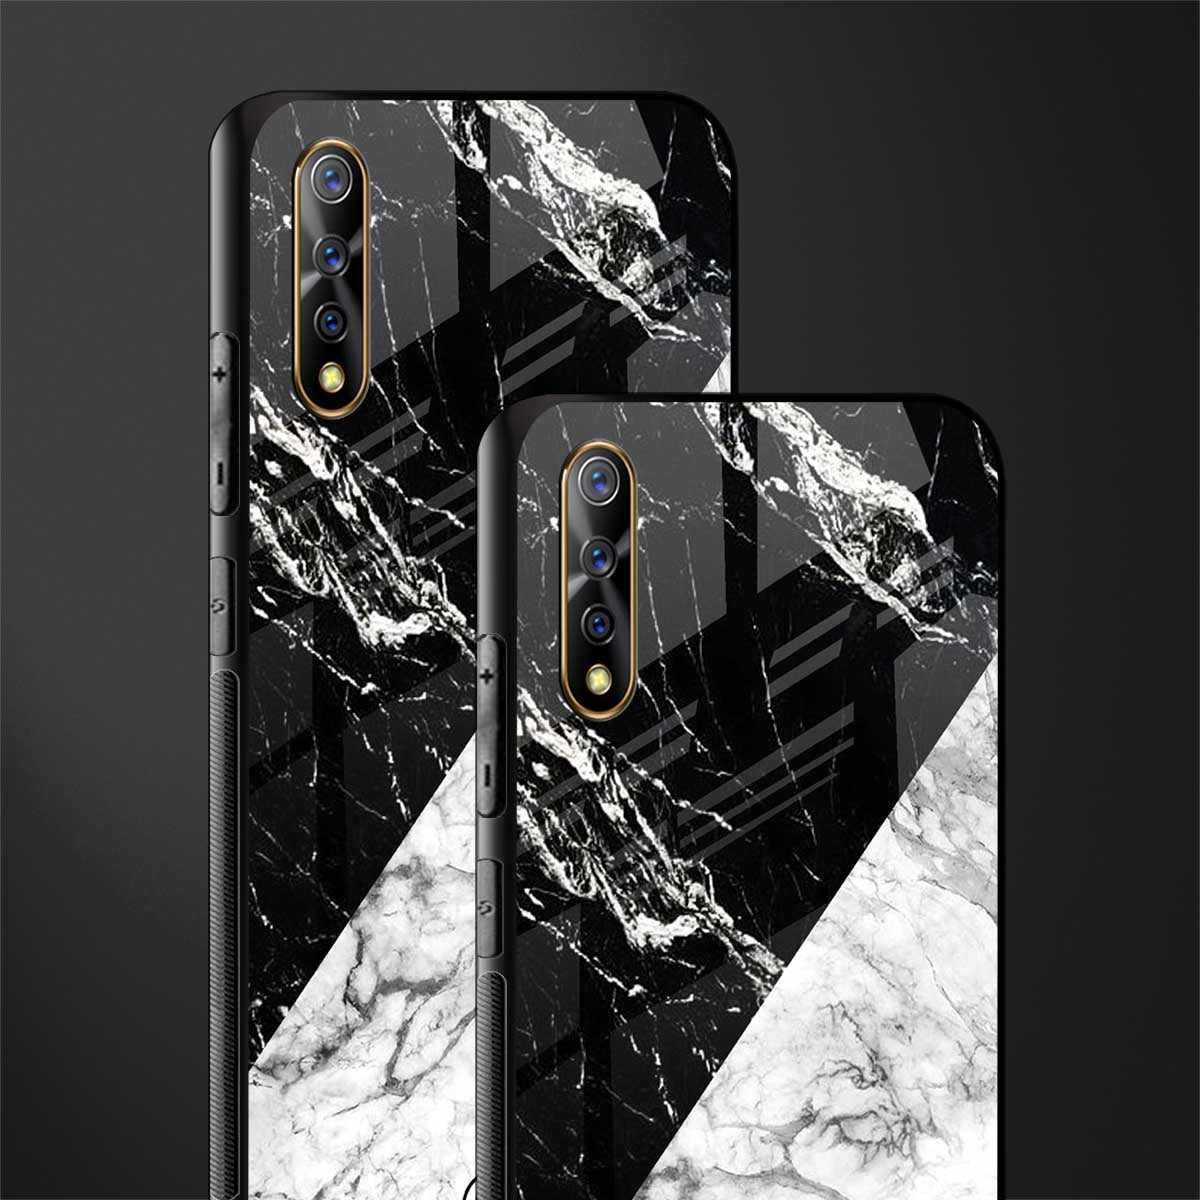 fatal contradiction phone cover for vivo z1x